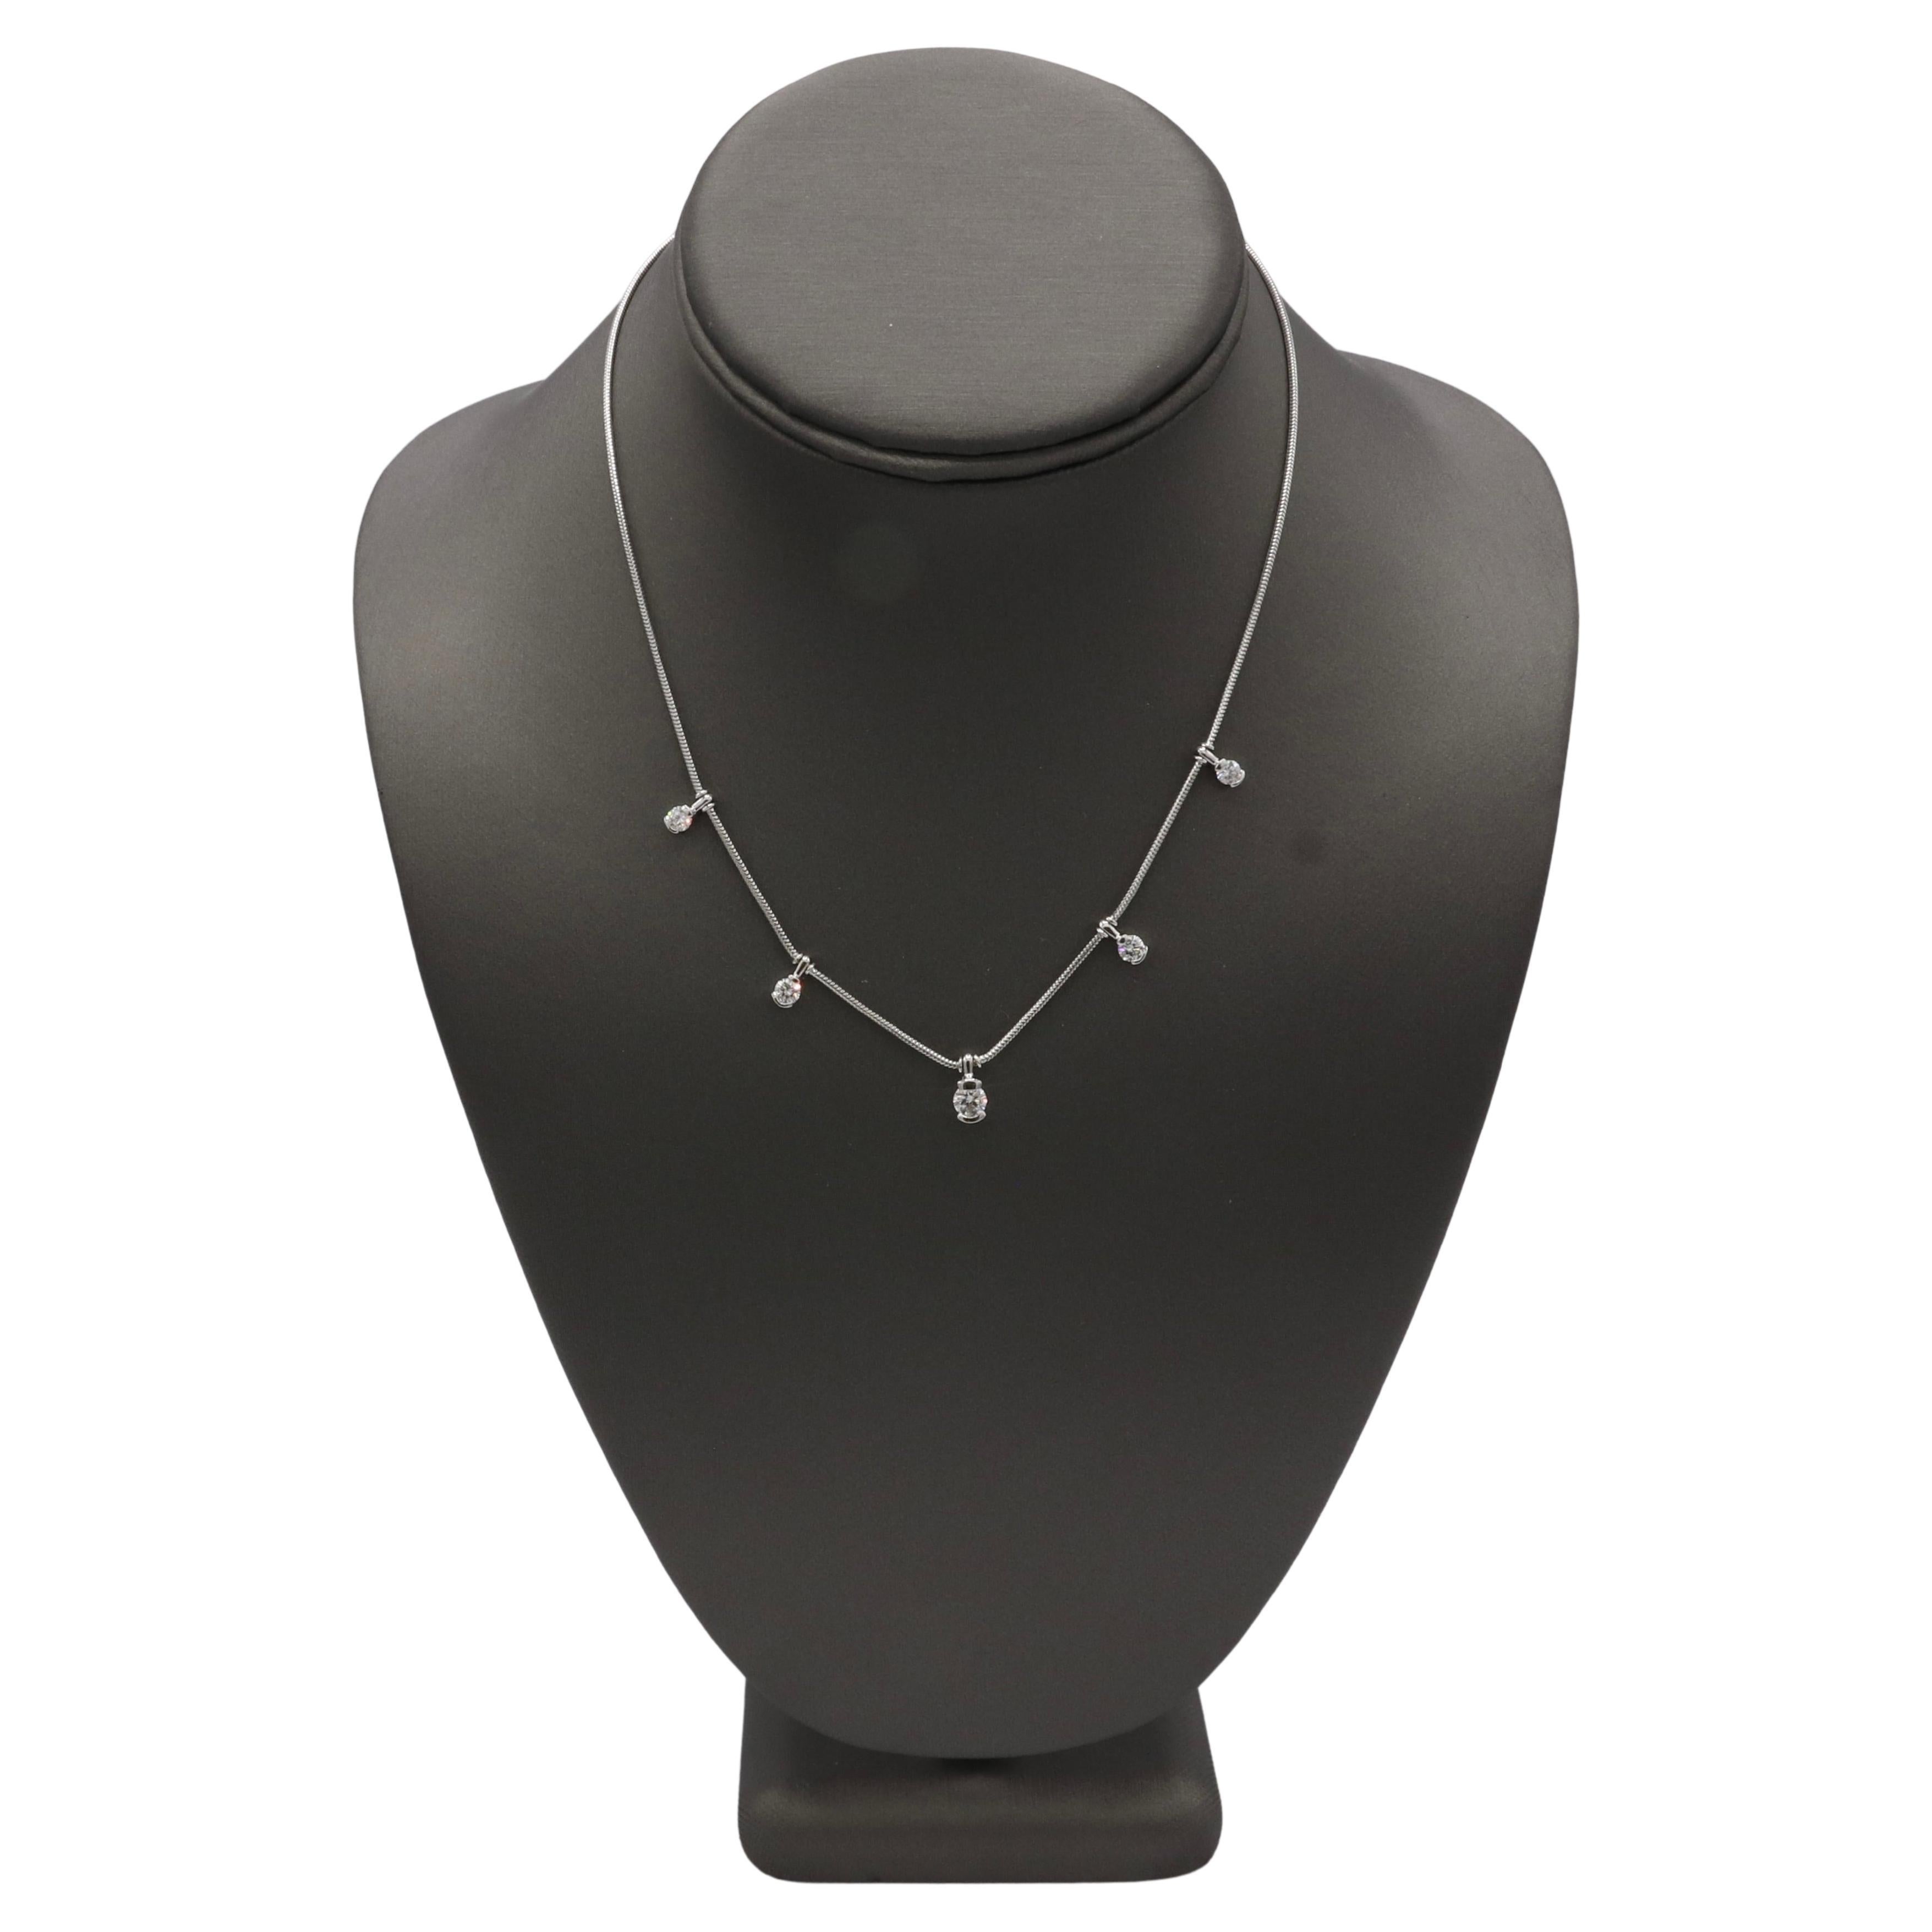 Jose Hess 'Garden Lights' Natural Diamond Station Necklace 18K White Gold 
Metal: 18k white gold
Weight: 6.68 grams
Diamonds: 1.09 CTW natural round diamonds G VS. Center Diamond is approx. .38 carat
Length: 16 inche snake chain
Signed: ©Jose Hess